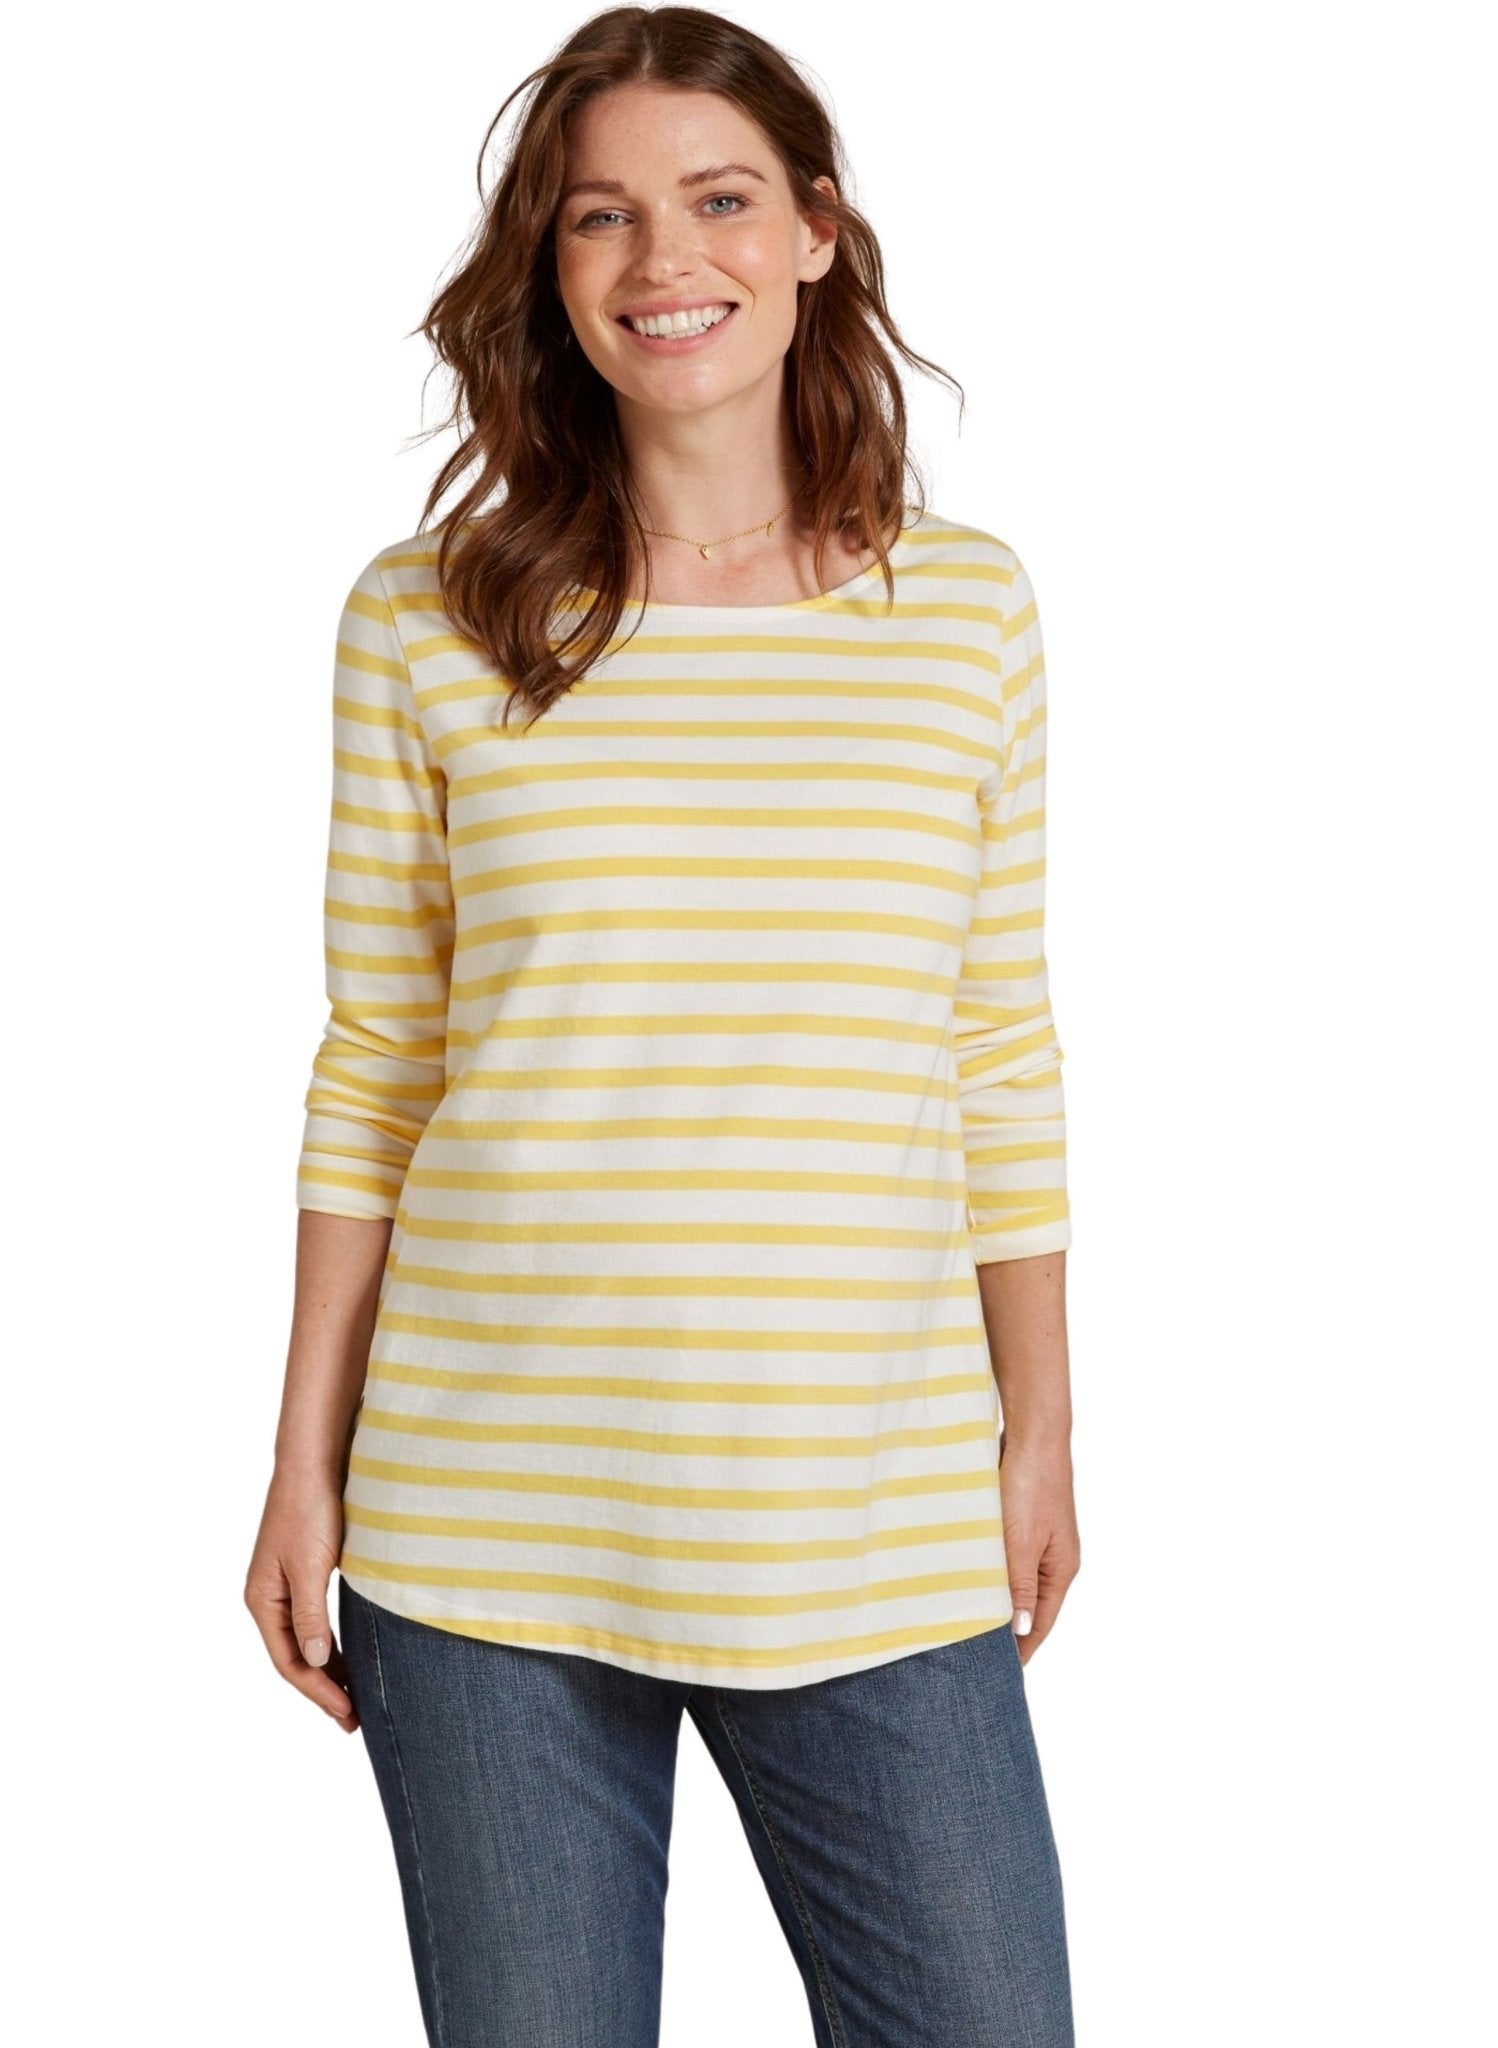 Harriet Maternity Top - Yellow/White Stripes - Mums and Bumps